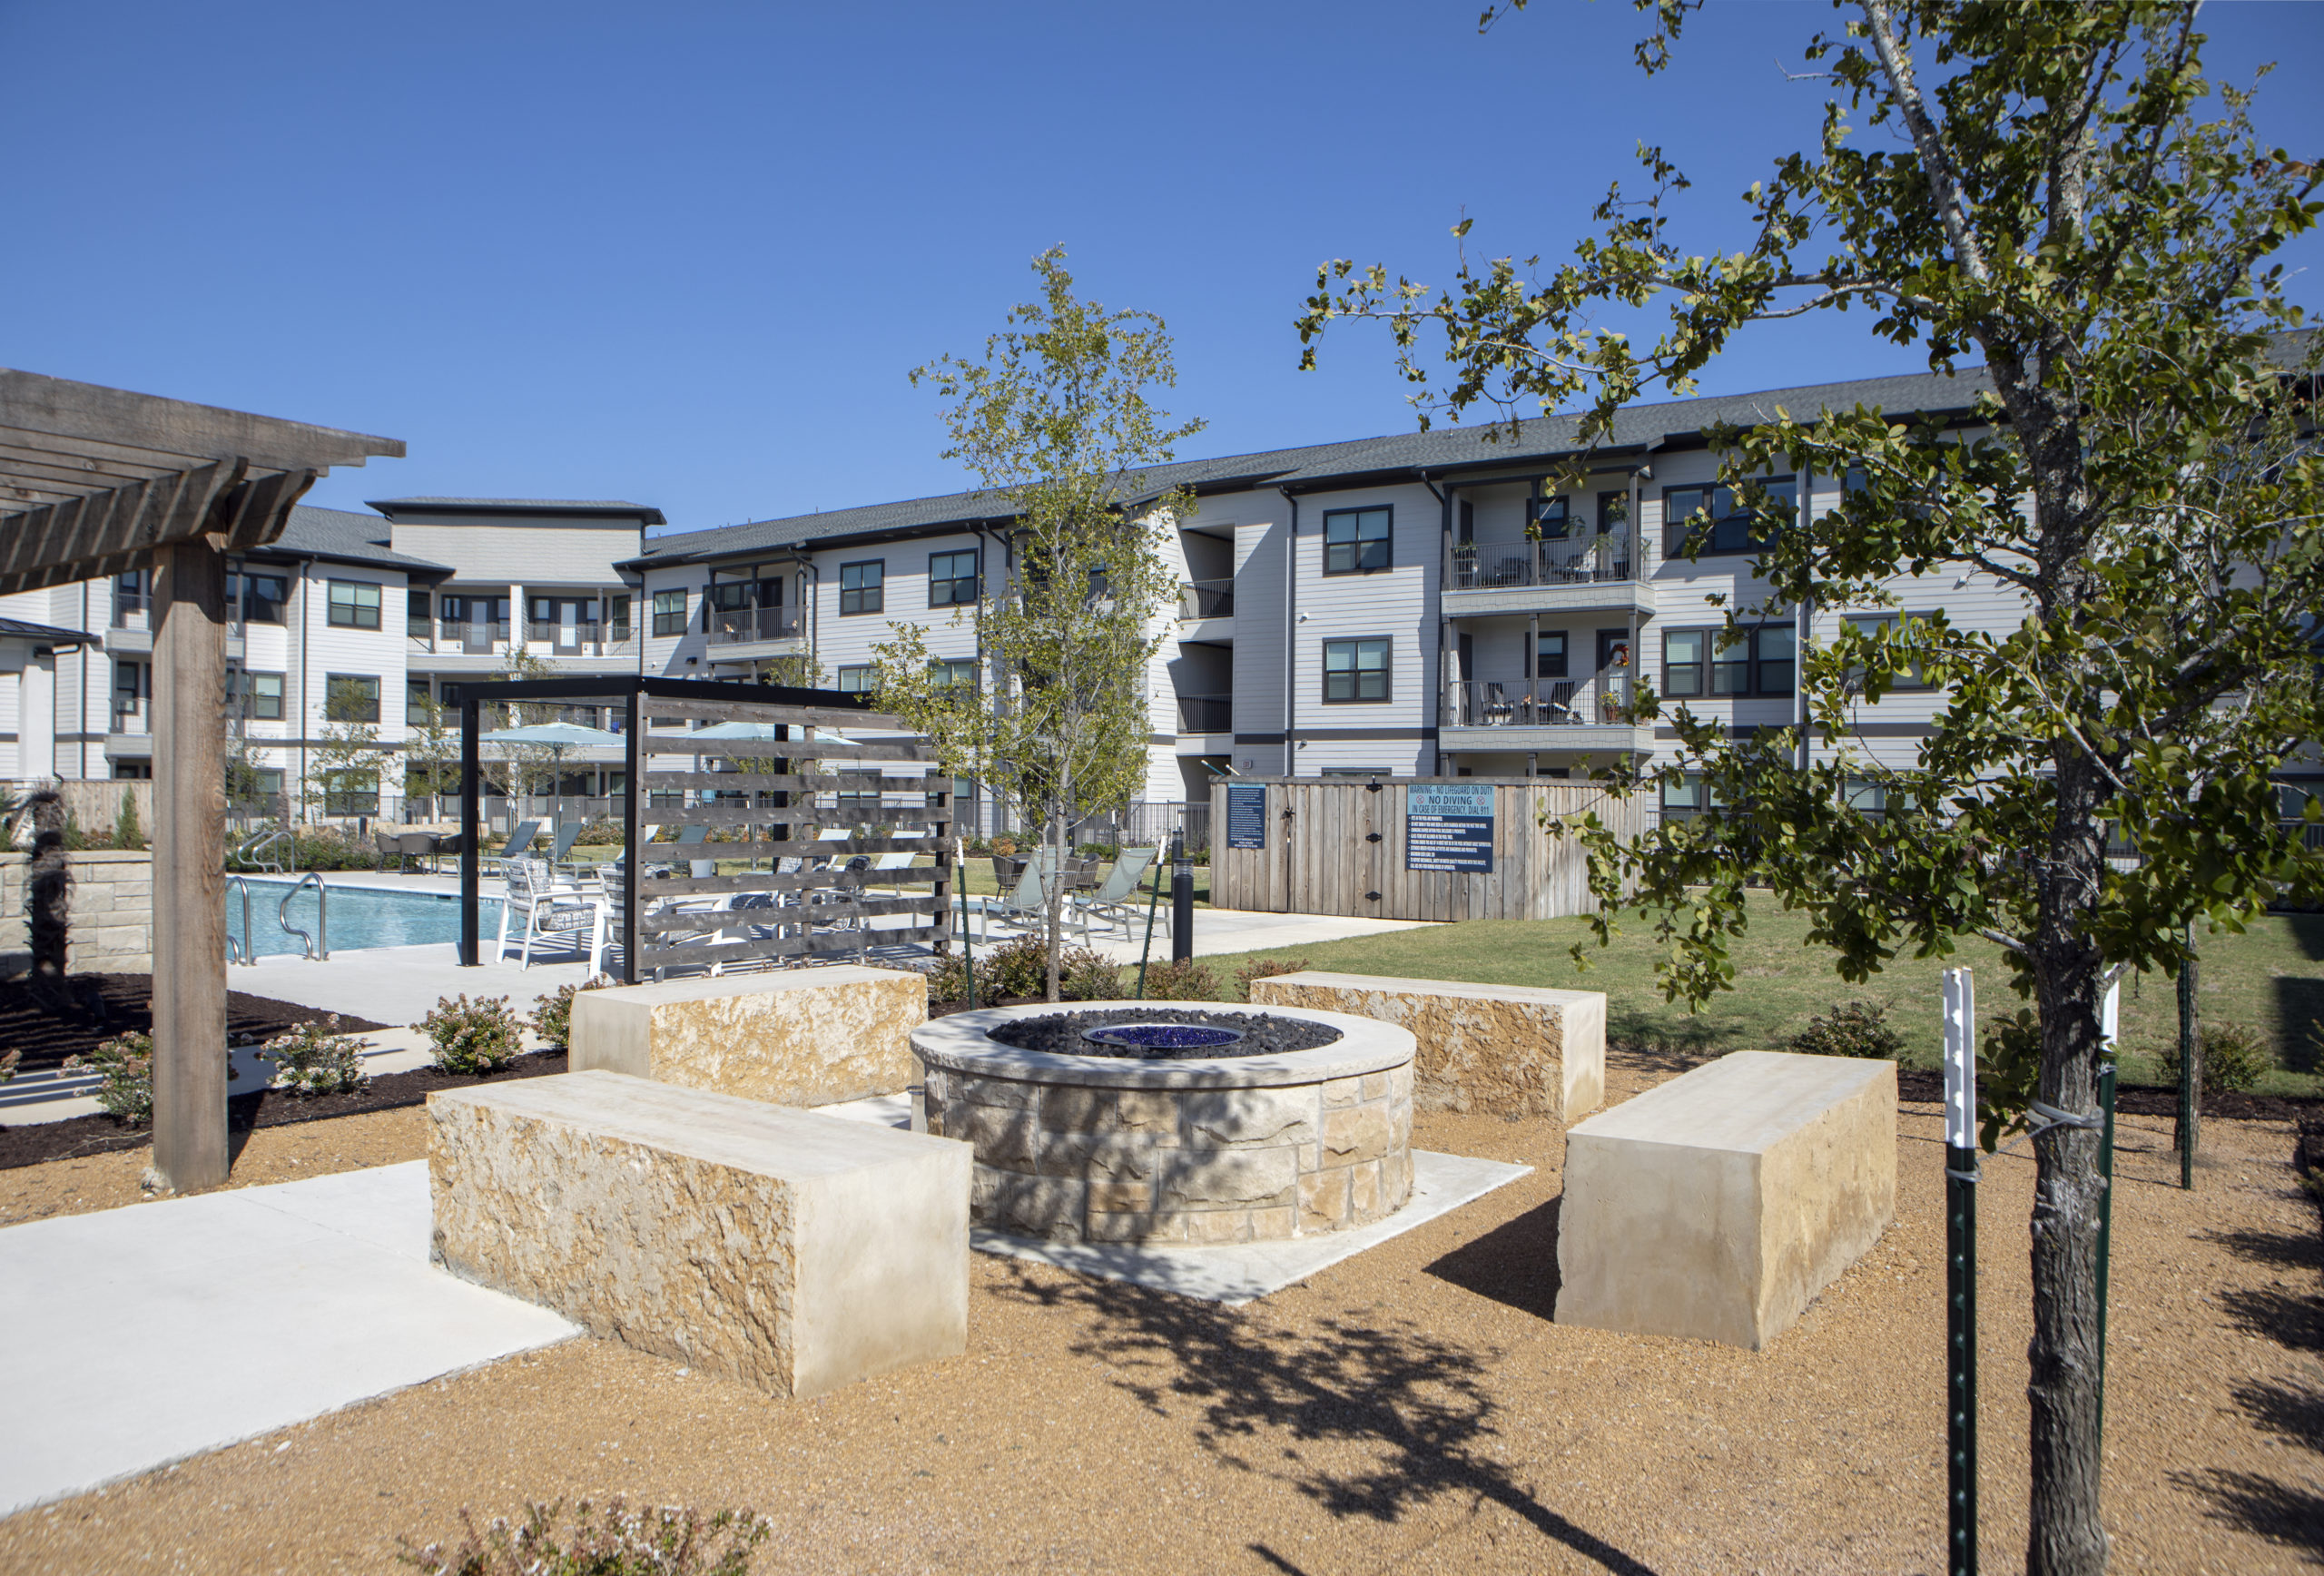 Gas fire pits at Solea Keller Apartments in Fort Worth Texas